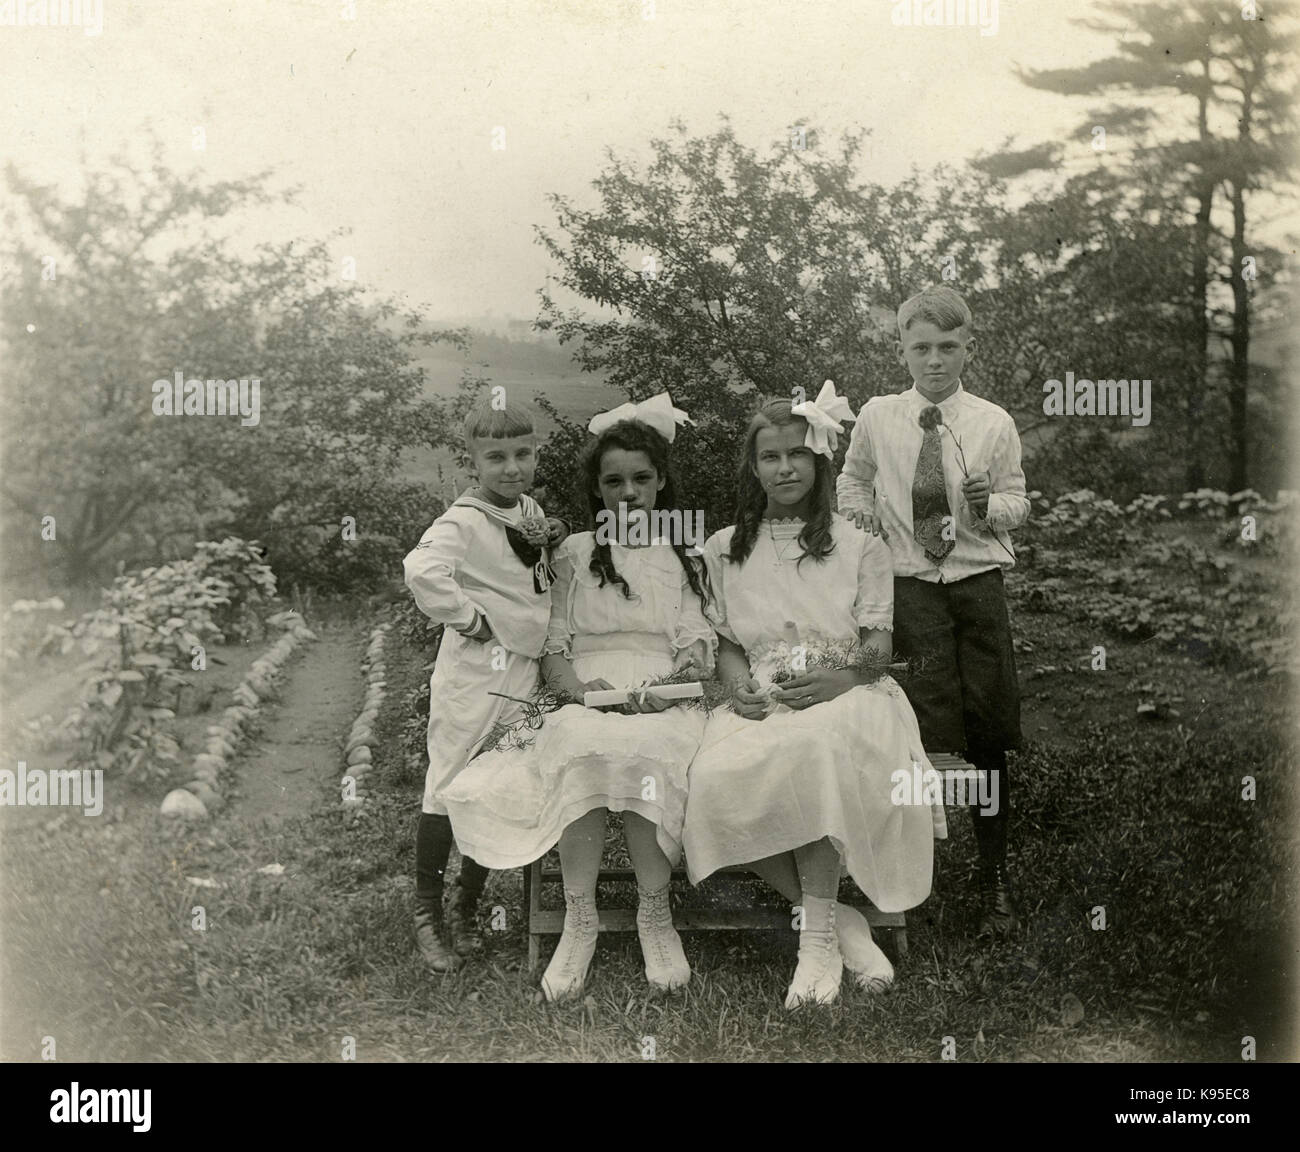 Antique c1920 photograph, two girls in white holding scrolls, possibly on the day of their First Communion; one girl wears a cross pendant. They are flanked by two boys. Location unknown, probably New England. SOURCE: ORIGINAL PHOTOGRAPH. Stock Photo